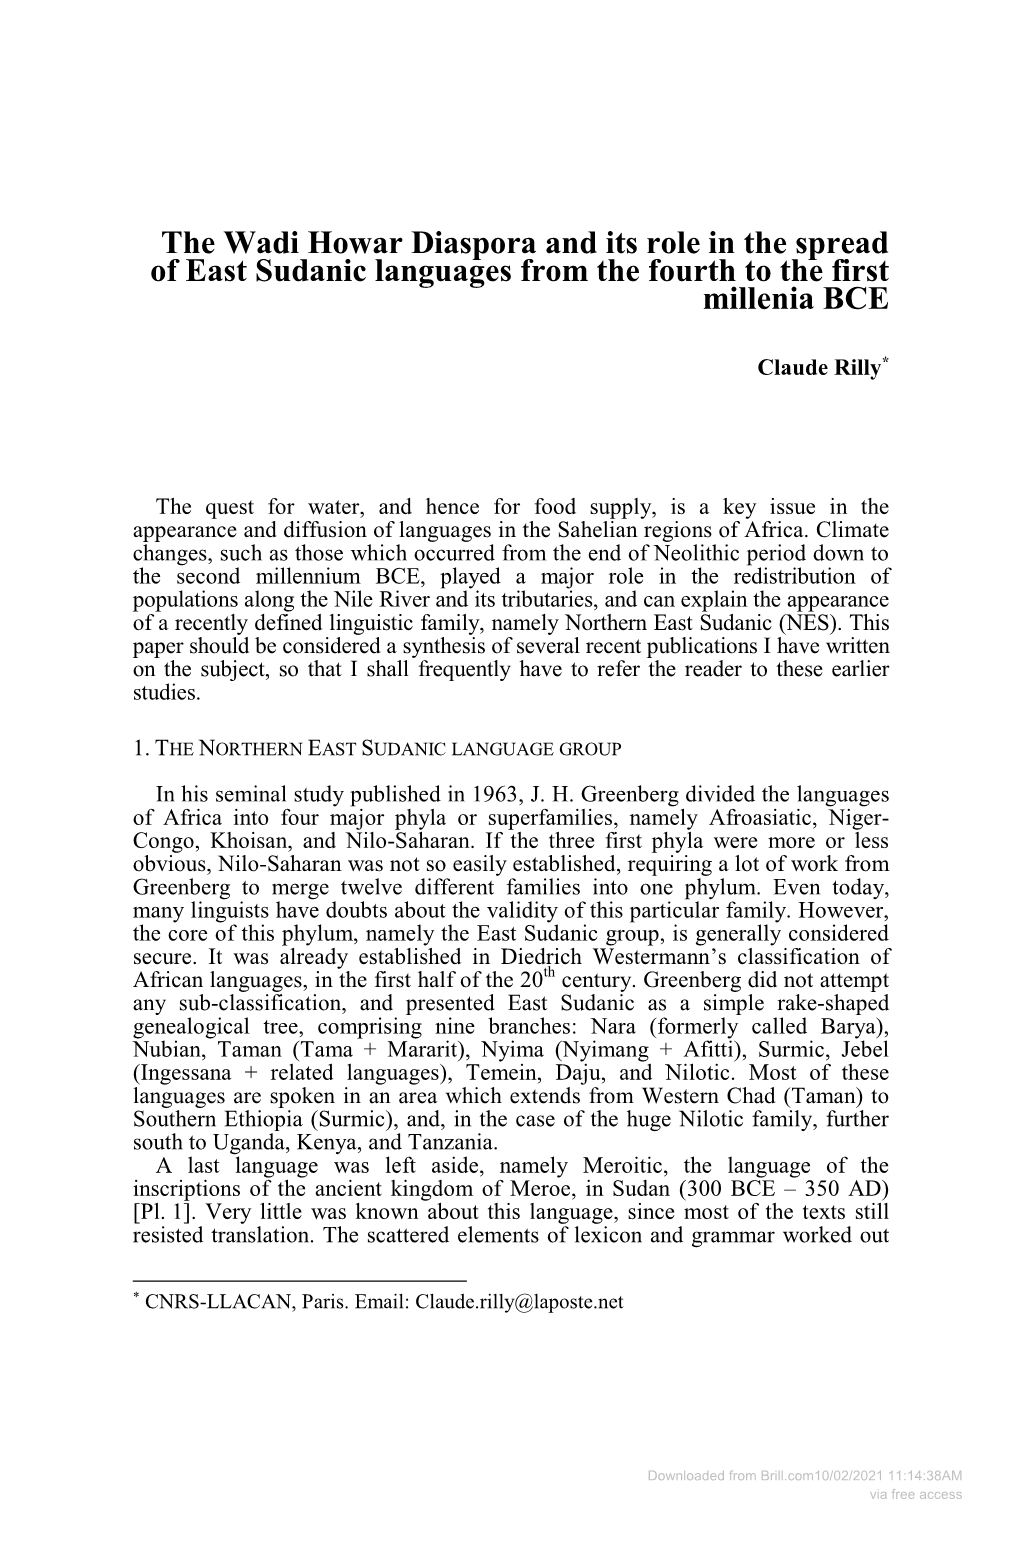 The Wadi Howar Diaspora and Its Role in the Spread of East Sudanic Languages from the Fourth to the First Millenia BCE